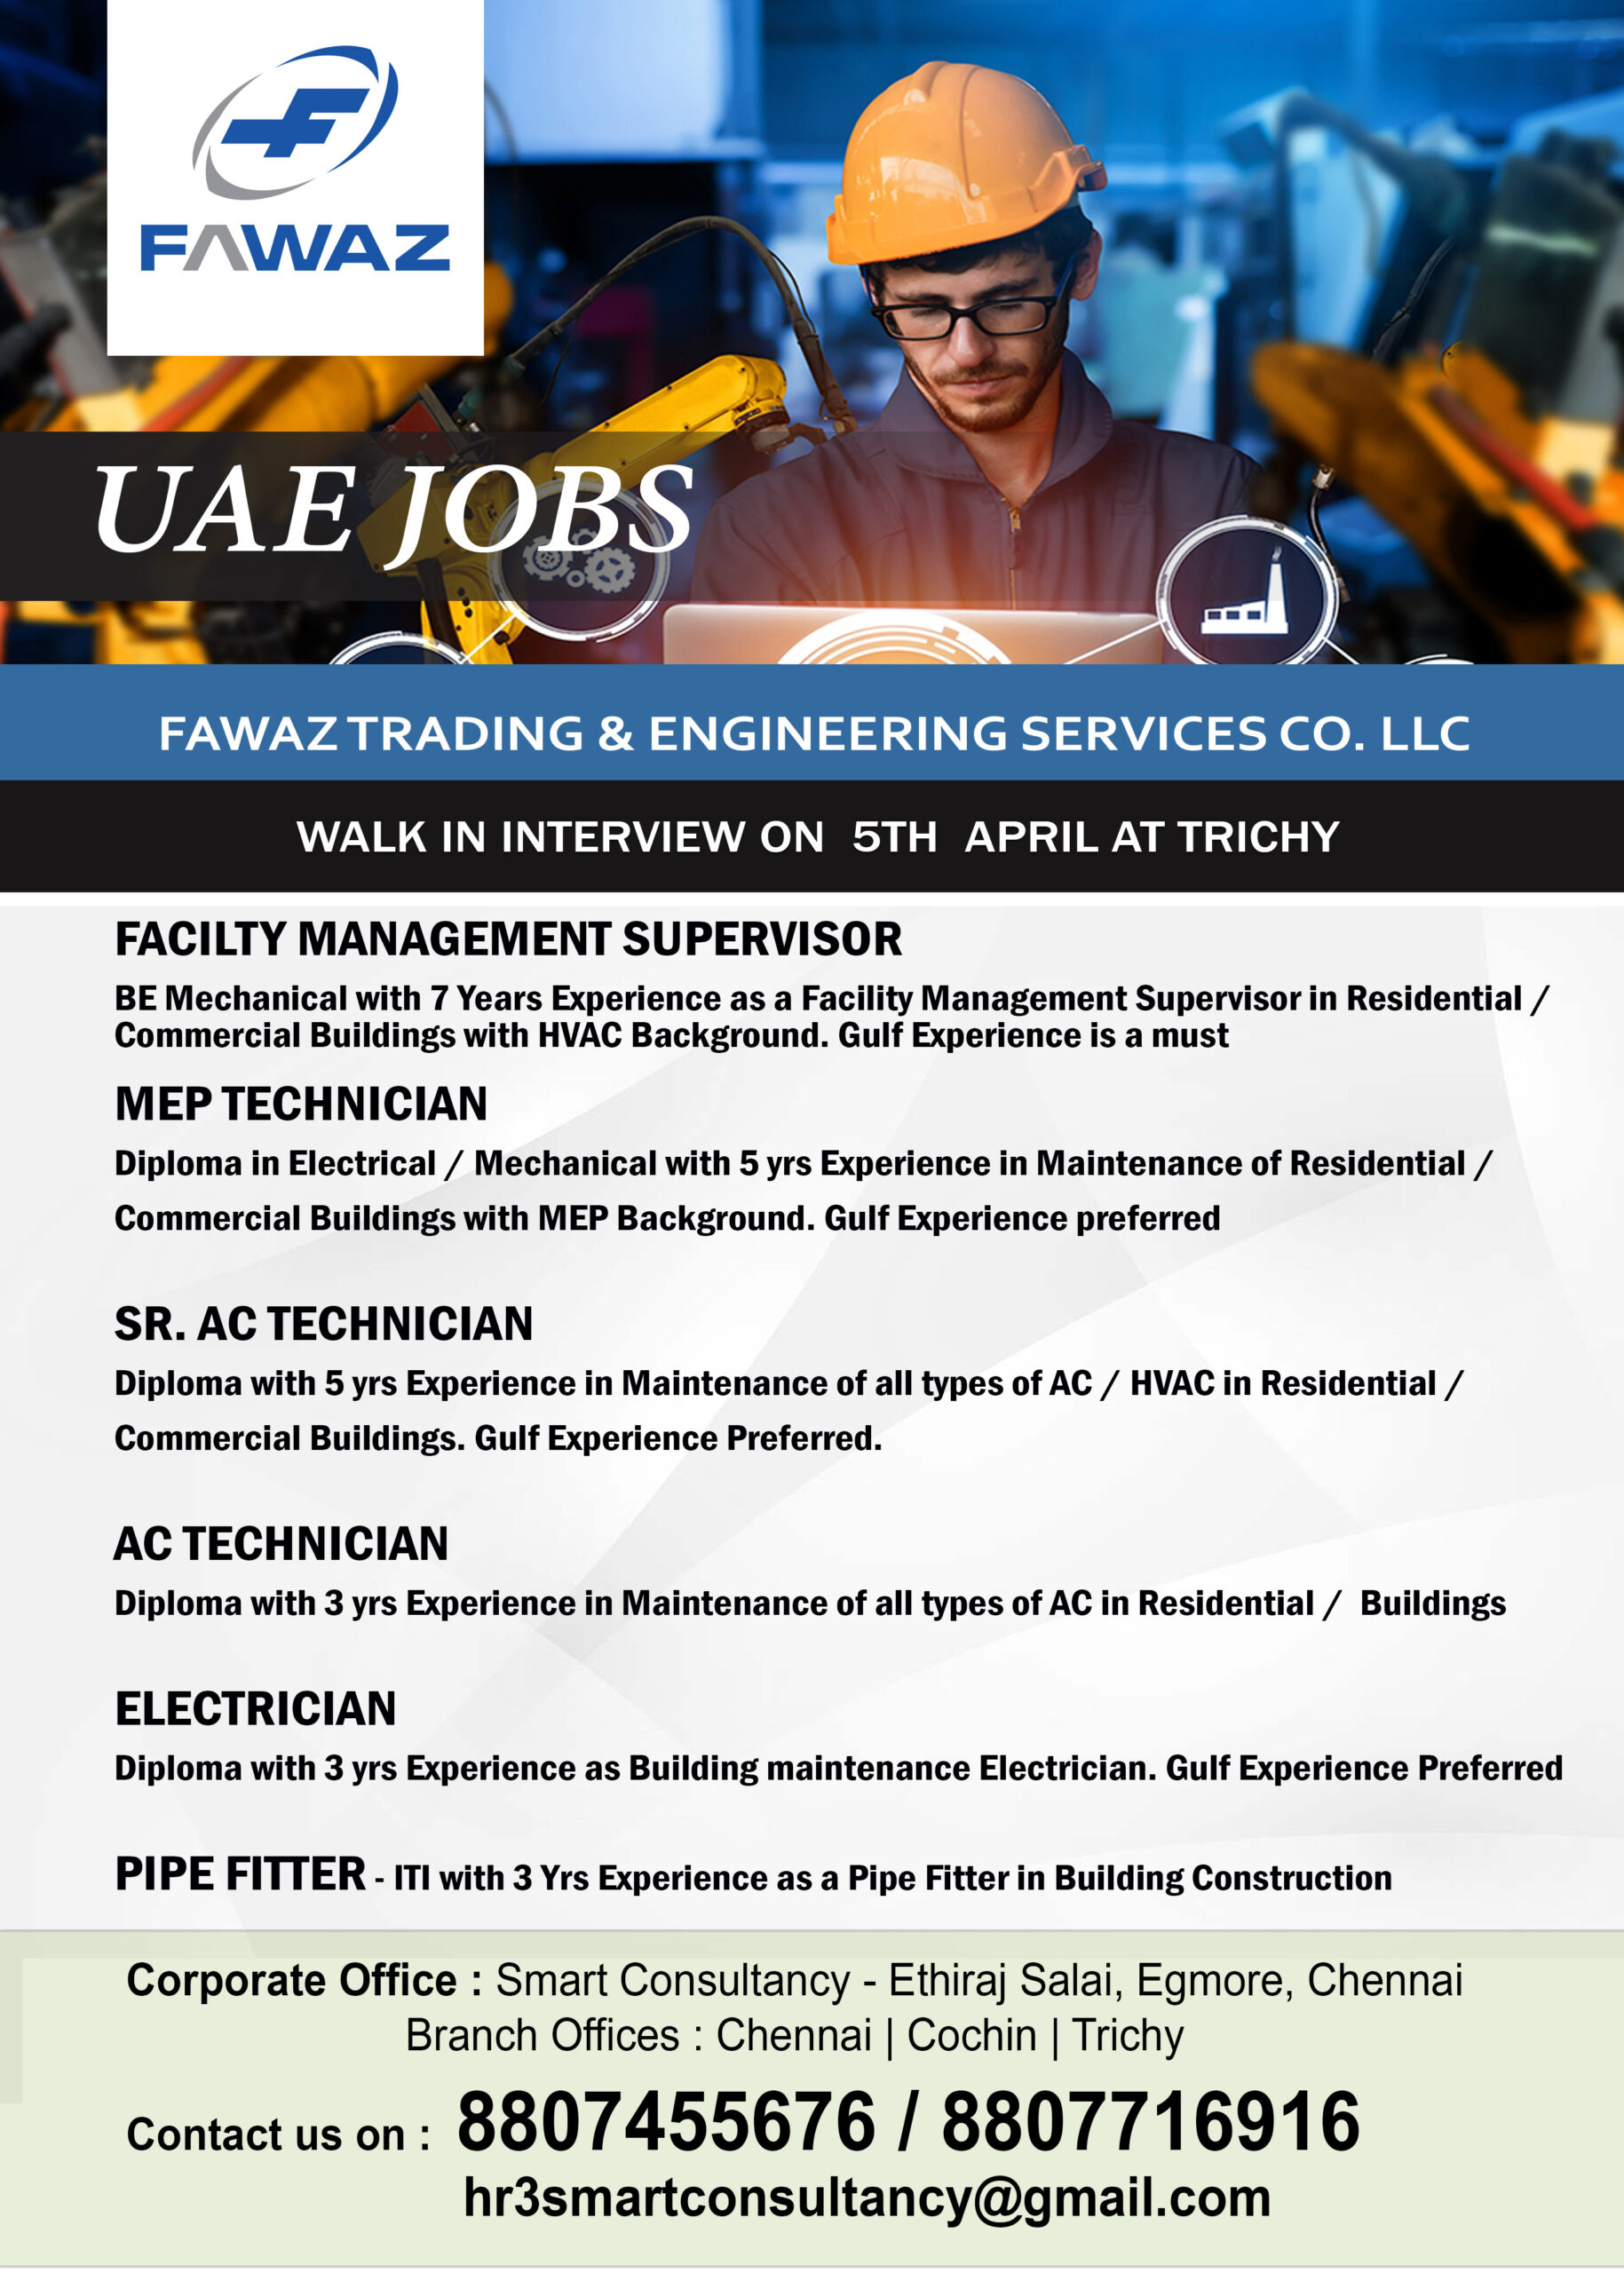 UAE JOBS🇦🇪🇦🇪🇦🇪 FAWAZ Trading & Engineering Services Co. LLC WALK IN INTERVIEW ON  5TH  APRIL AT TRICHY